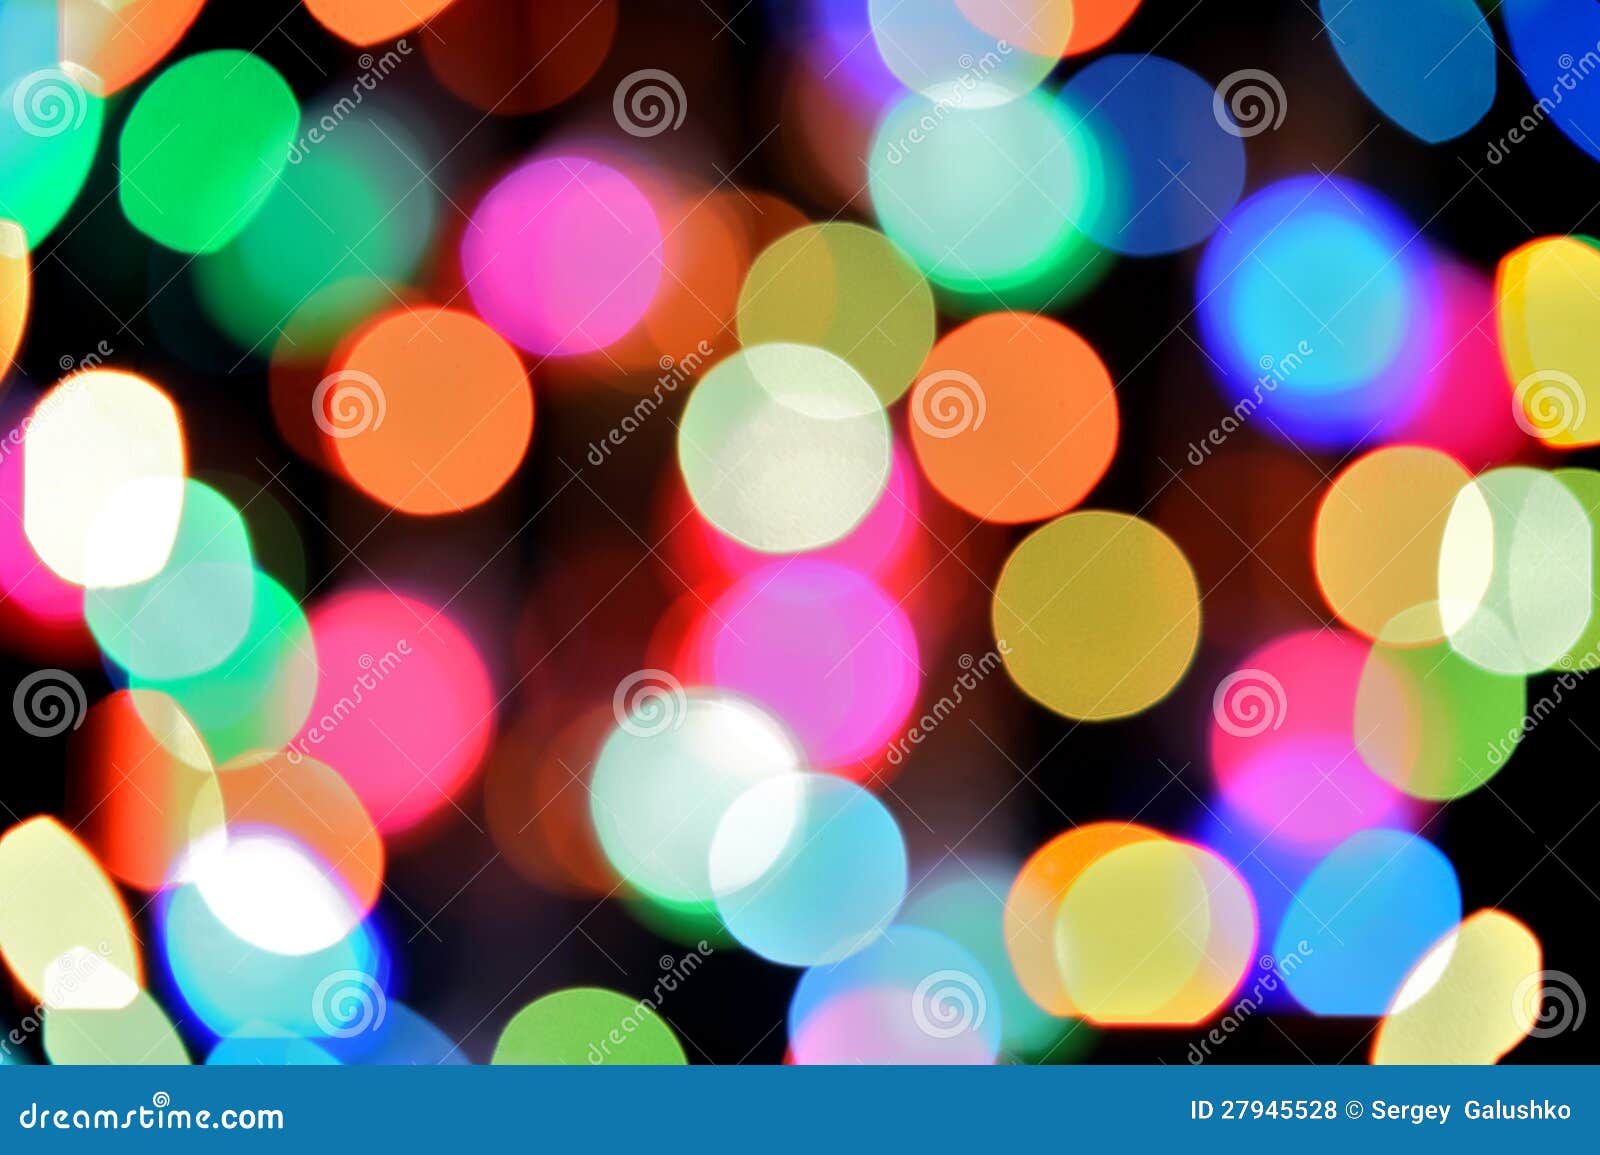 Defocused color background stock photo. Image of backgrounds - 27945528